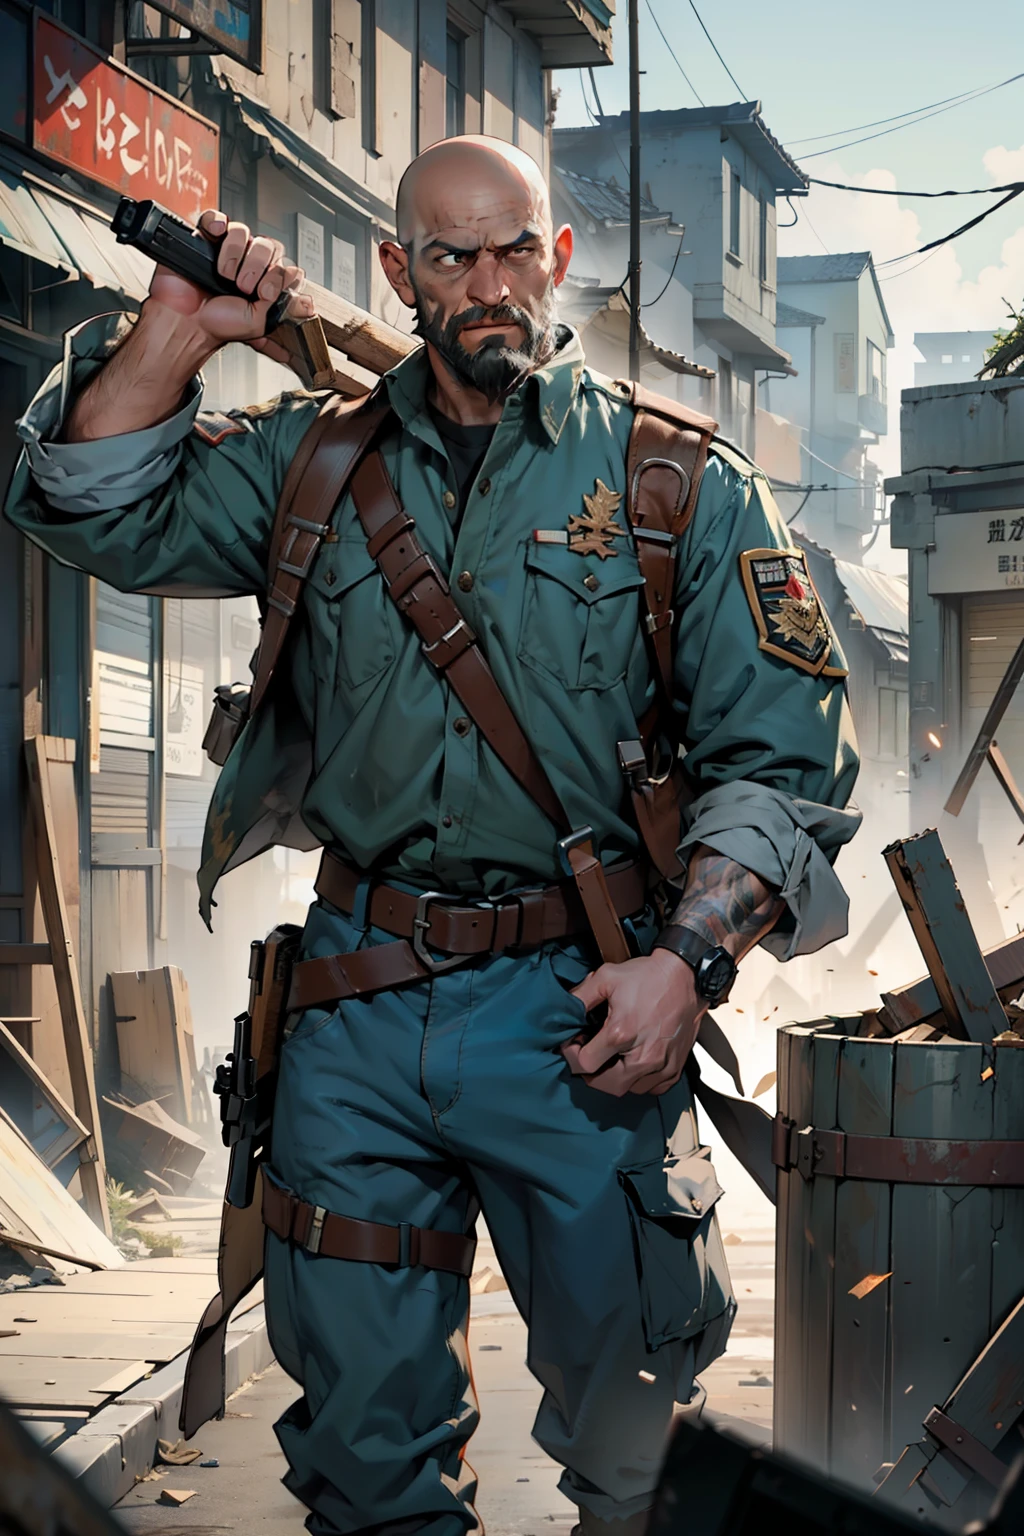 A middle-aged male hired gun, bald with a short, meticulously designed beard, stands tall against the backdrop of a chaotic battlefield.His eyes, ultra-detailed and hyperrealistic, convey a fierce intensity and focus. His body, detailed and defined, is outfitted in a military uniform, the fabric worn and weathered from the rigors of combat. In one hand, he clutches a weathered gun, the barrel gleaming in the sunlight. Behind him, the landscape is a blur of explosion and destruction, the ground shaking beneath his feet from the impact of nearby blasts. Despite the chaos around him, his expression remains calm and determined, the lines on his face deepening with each